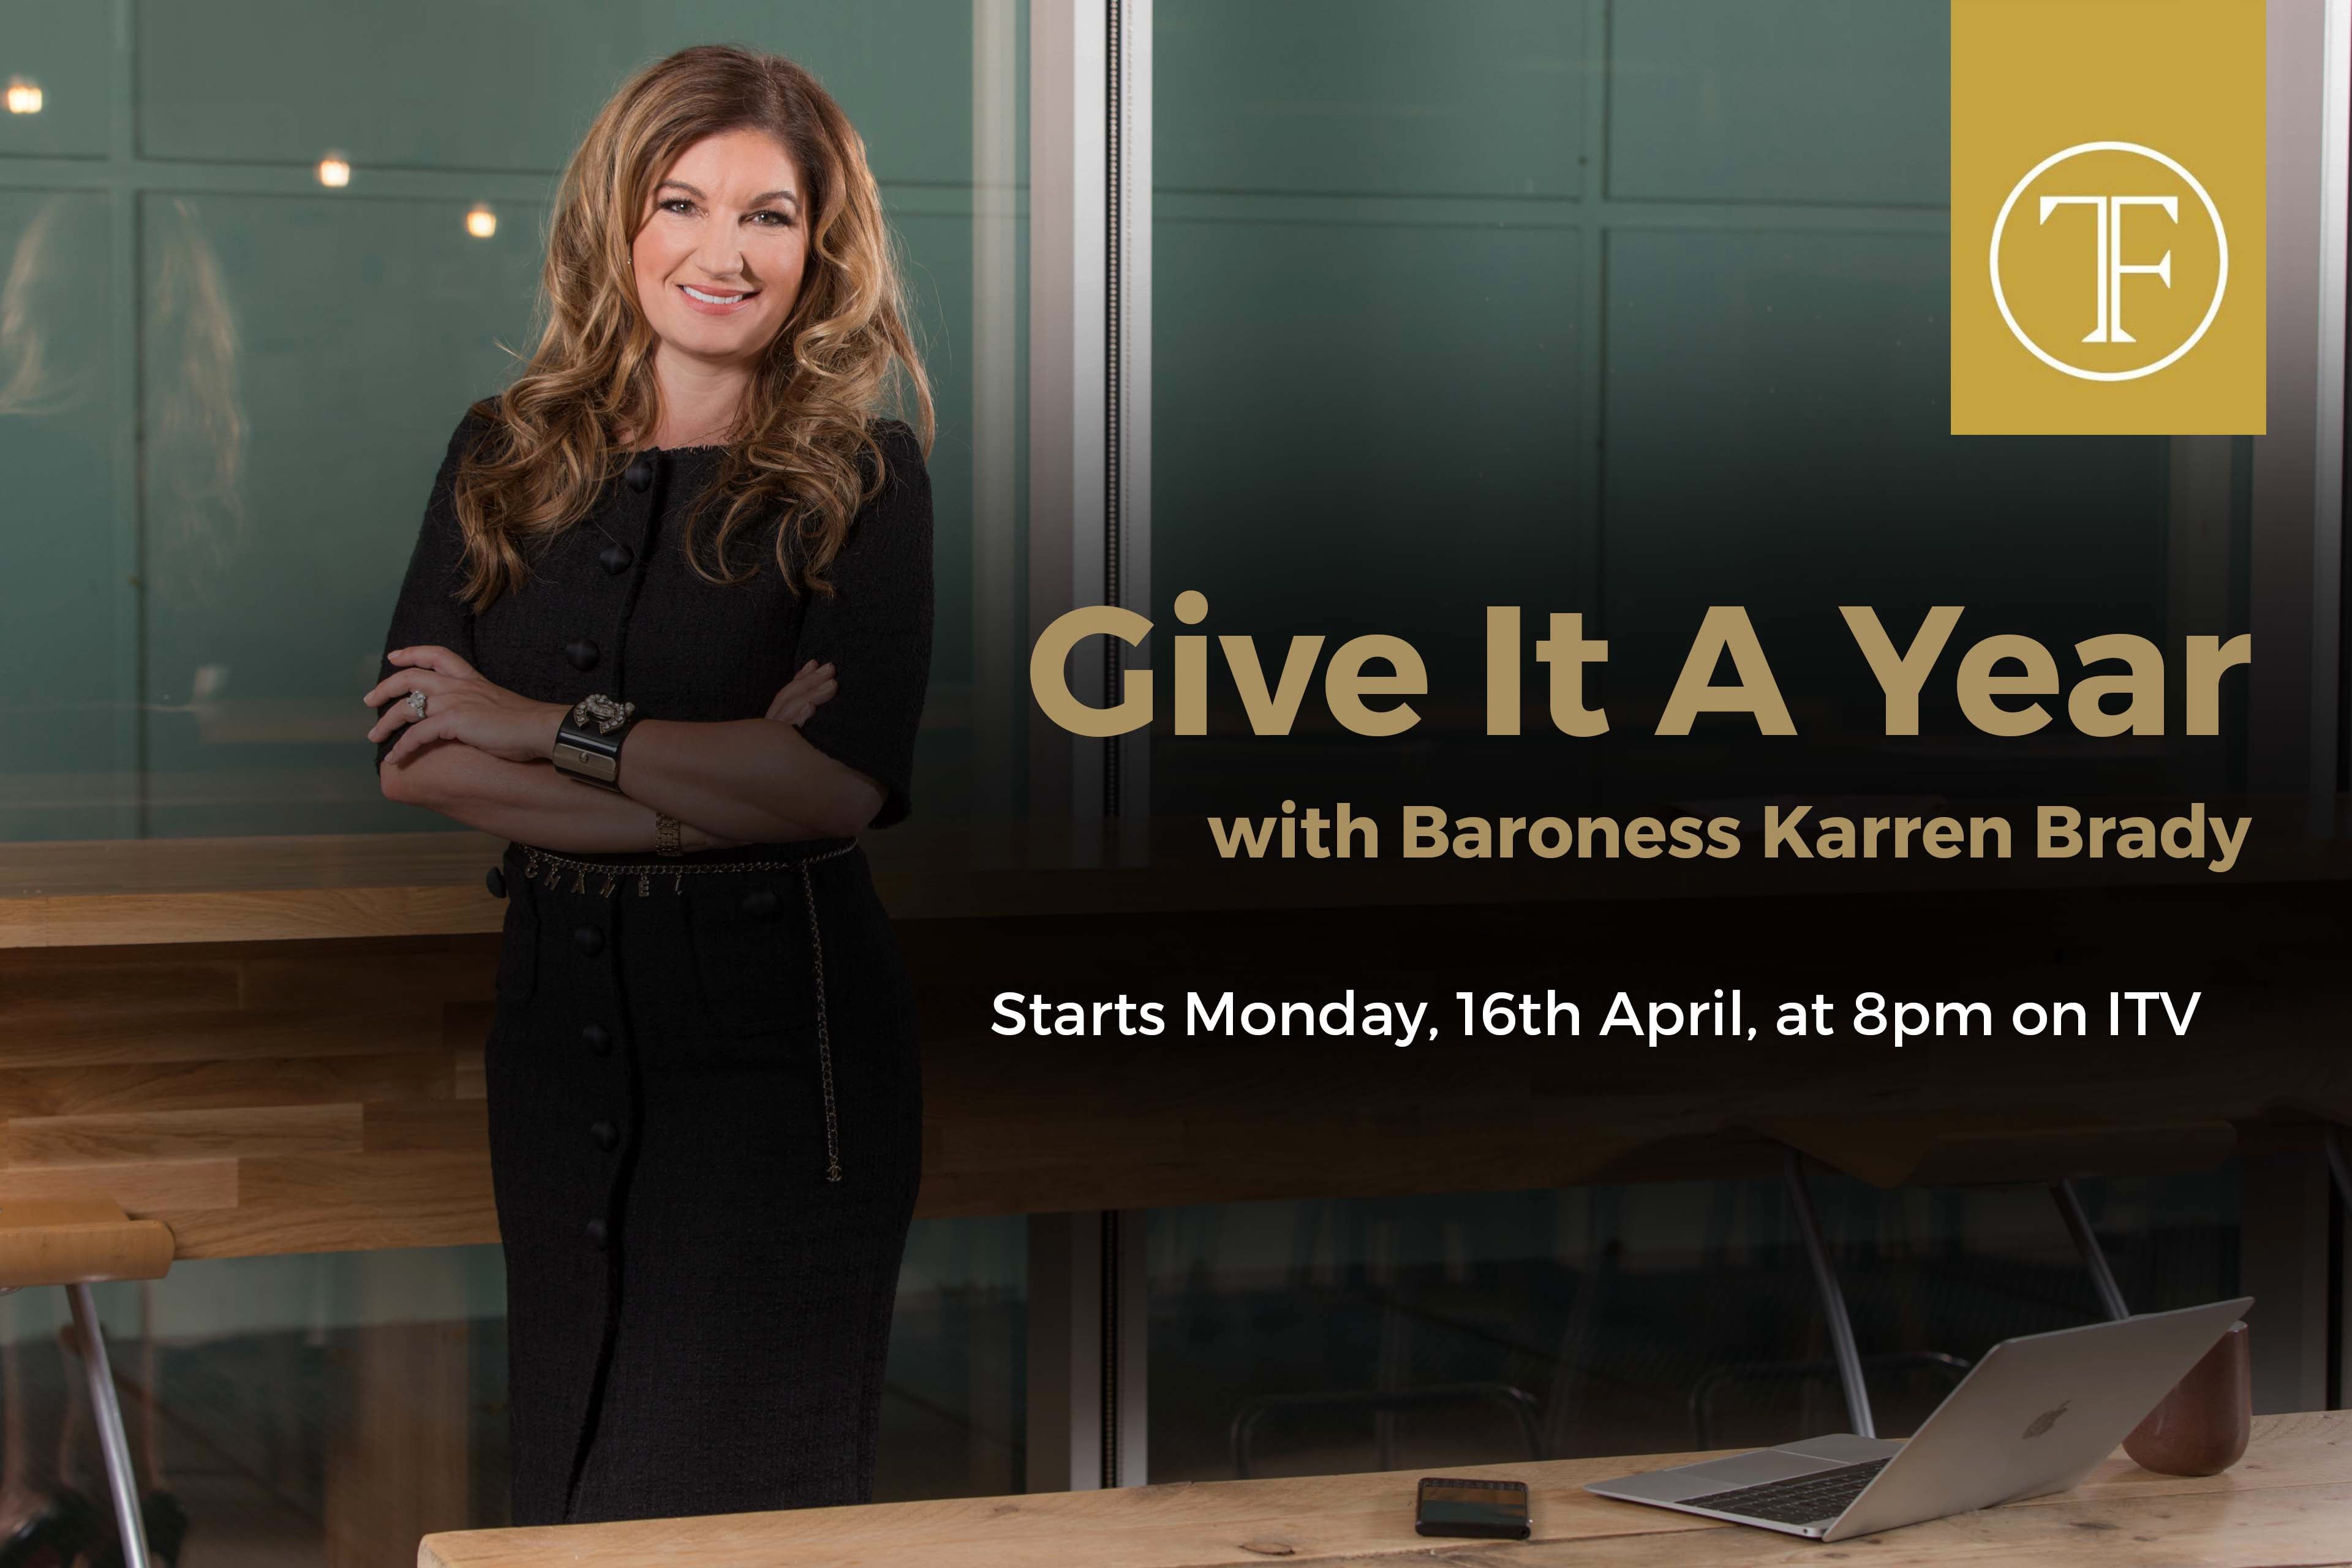 ITV's Give It A Year with Baroness Karren Brady to feature Children's Baby Clothing Brand Claude and Co